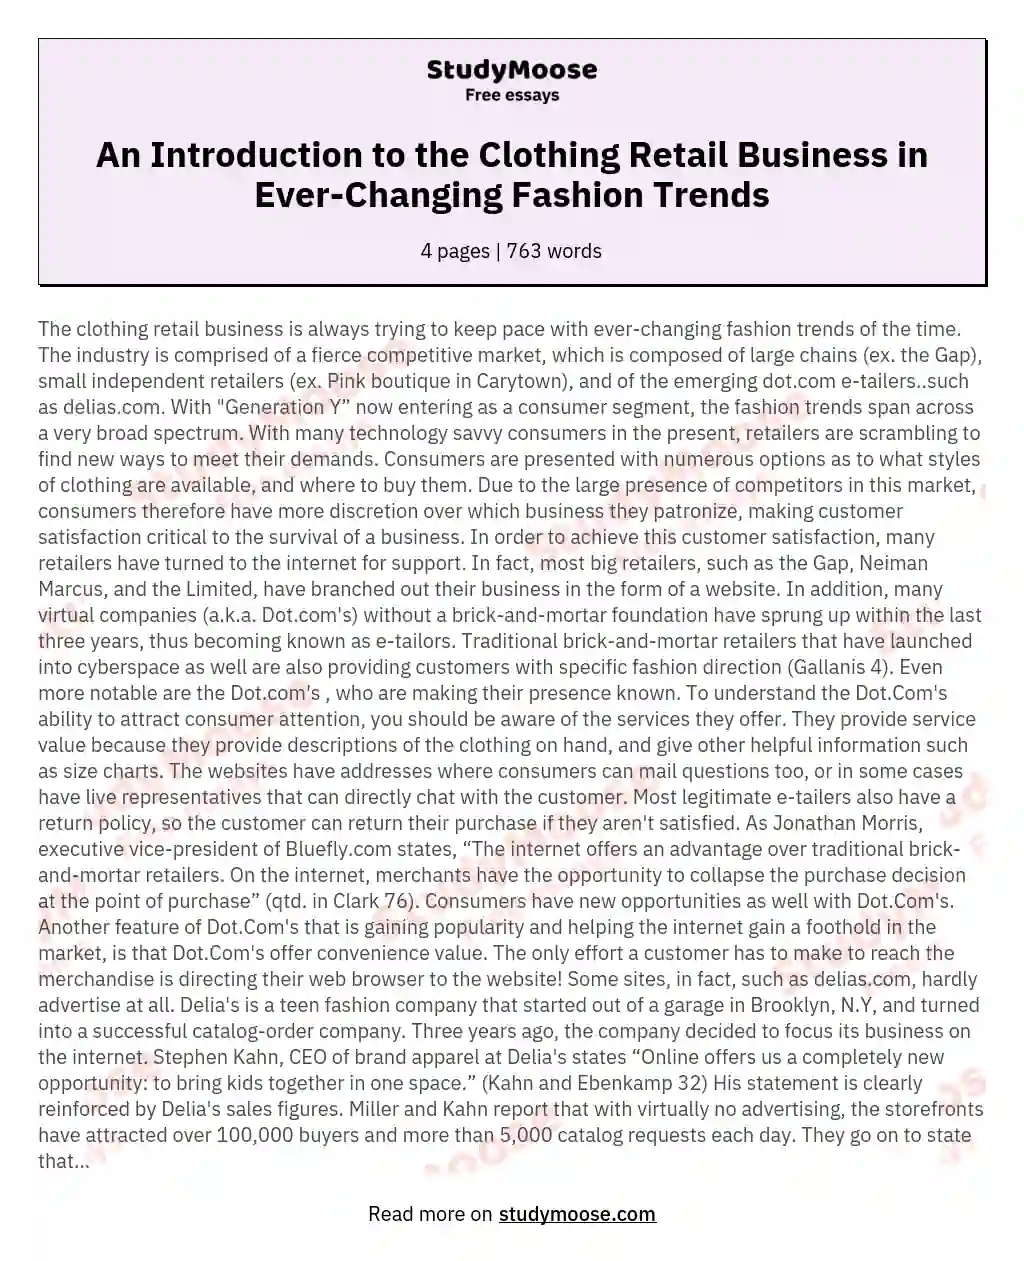 An Introduction to the Clothing Retail Business in Ever-Changing Fashion Trends essay